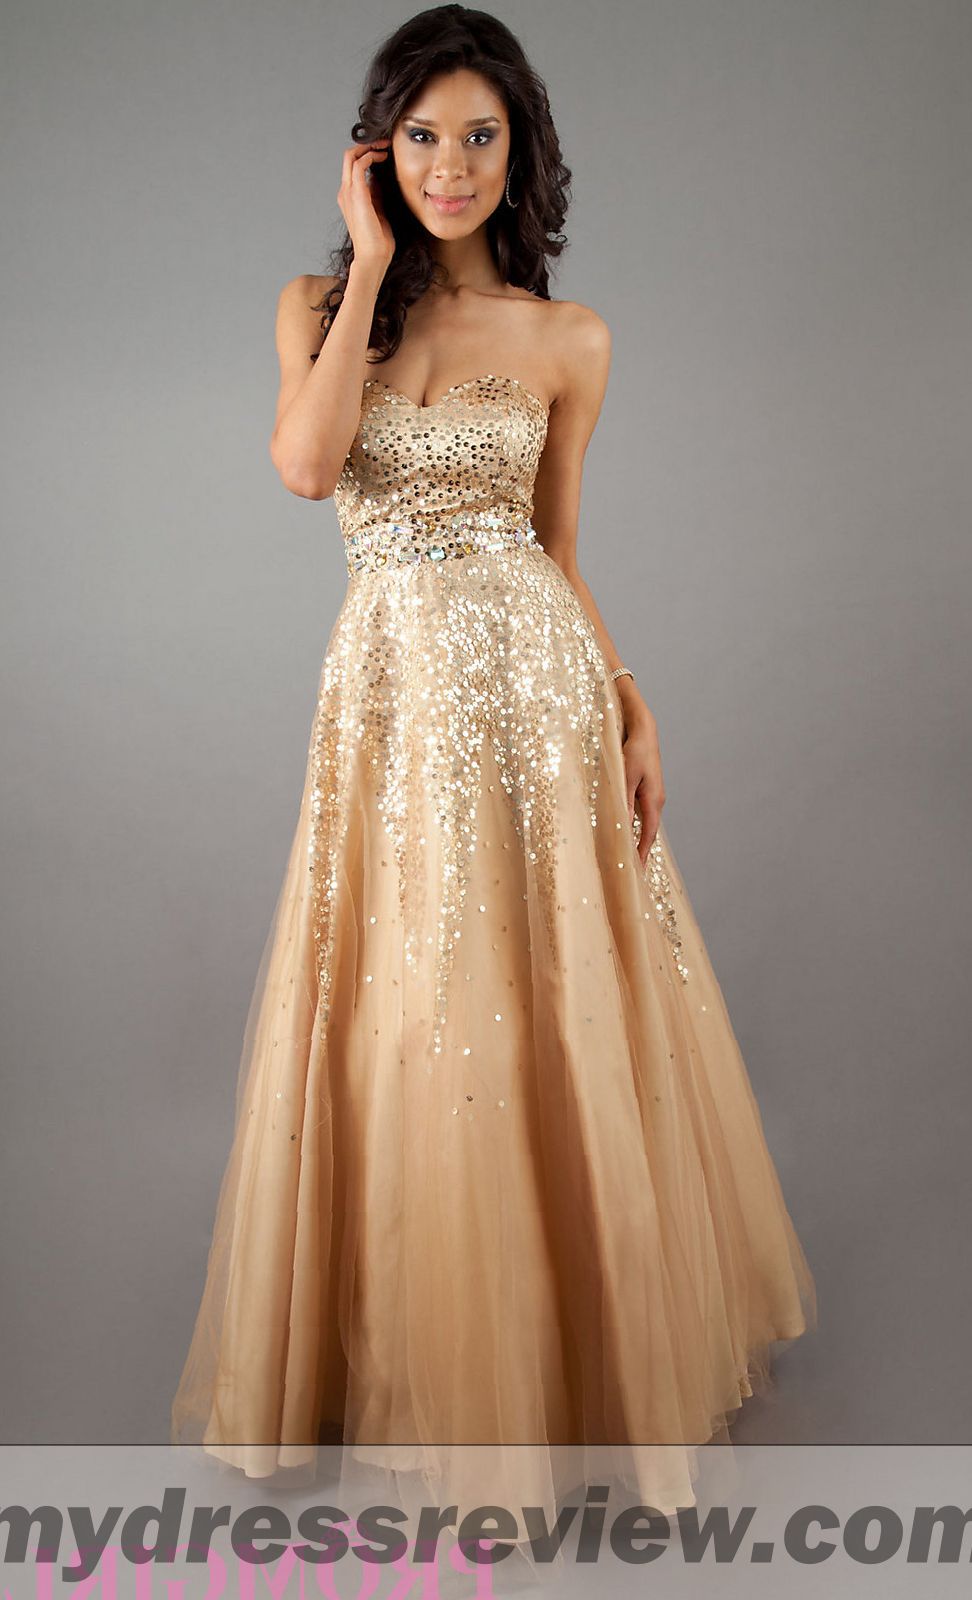 Black Prom Dress With Gold & 2017-2018